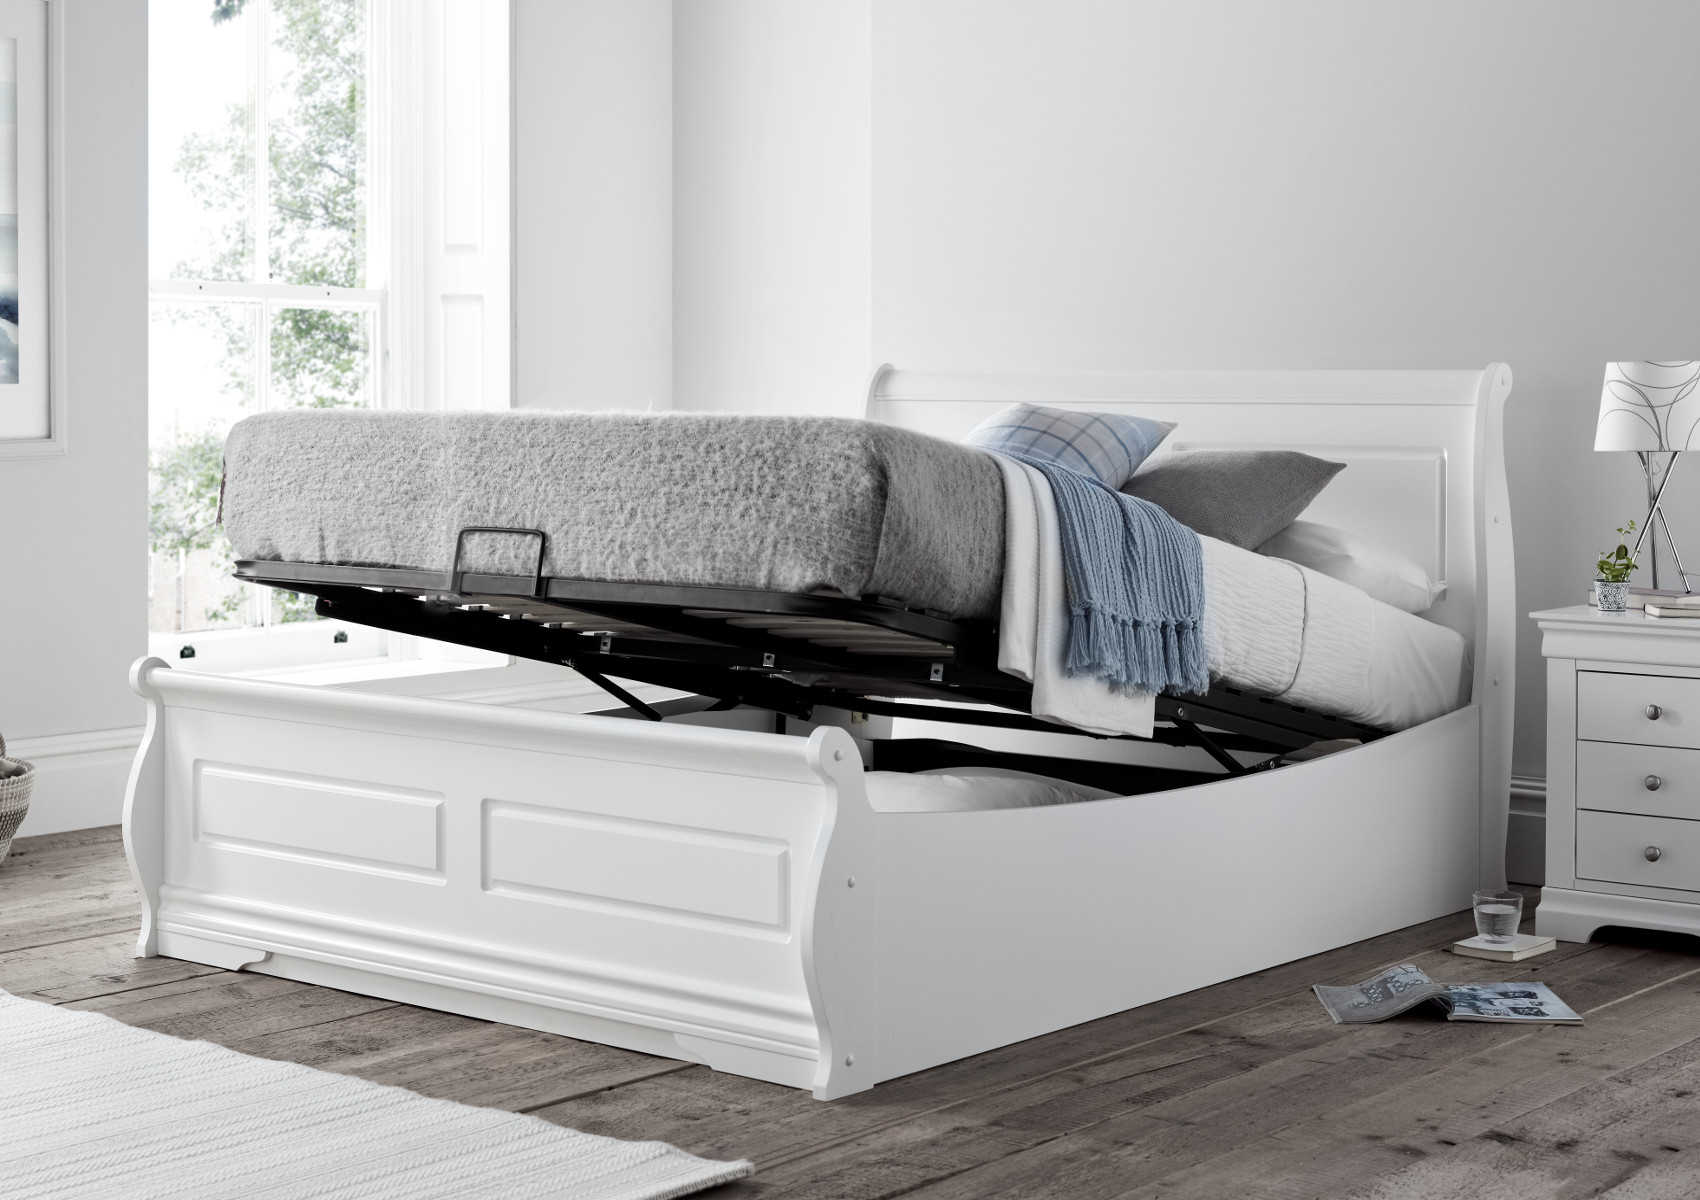 View Marseille White Wooden Ottoman Storage Bed Frame Only Time4Sleep information